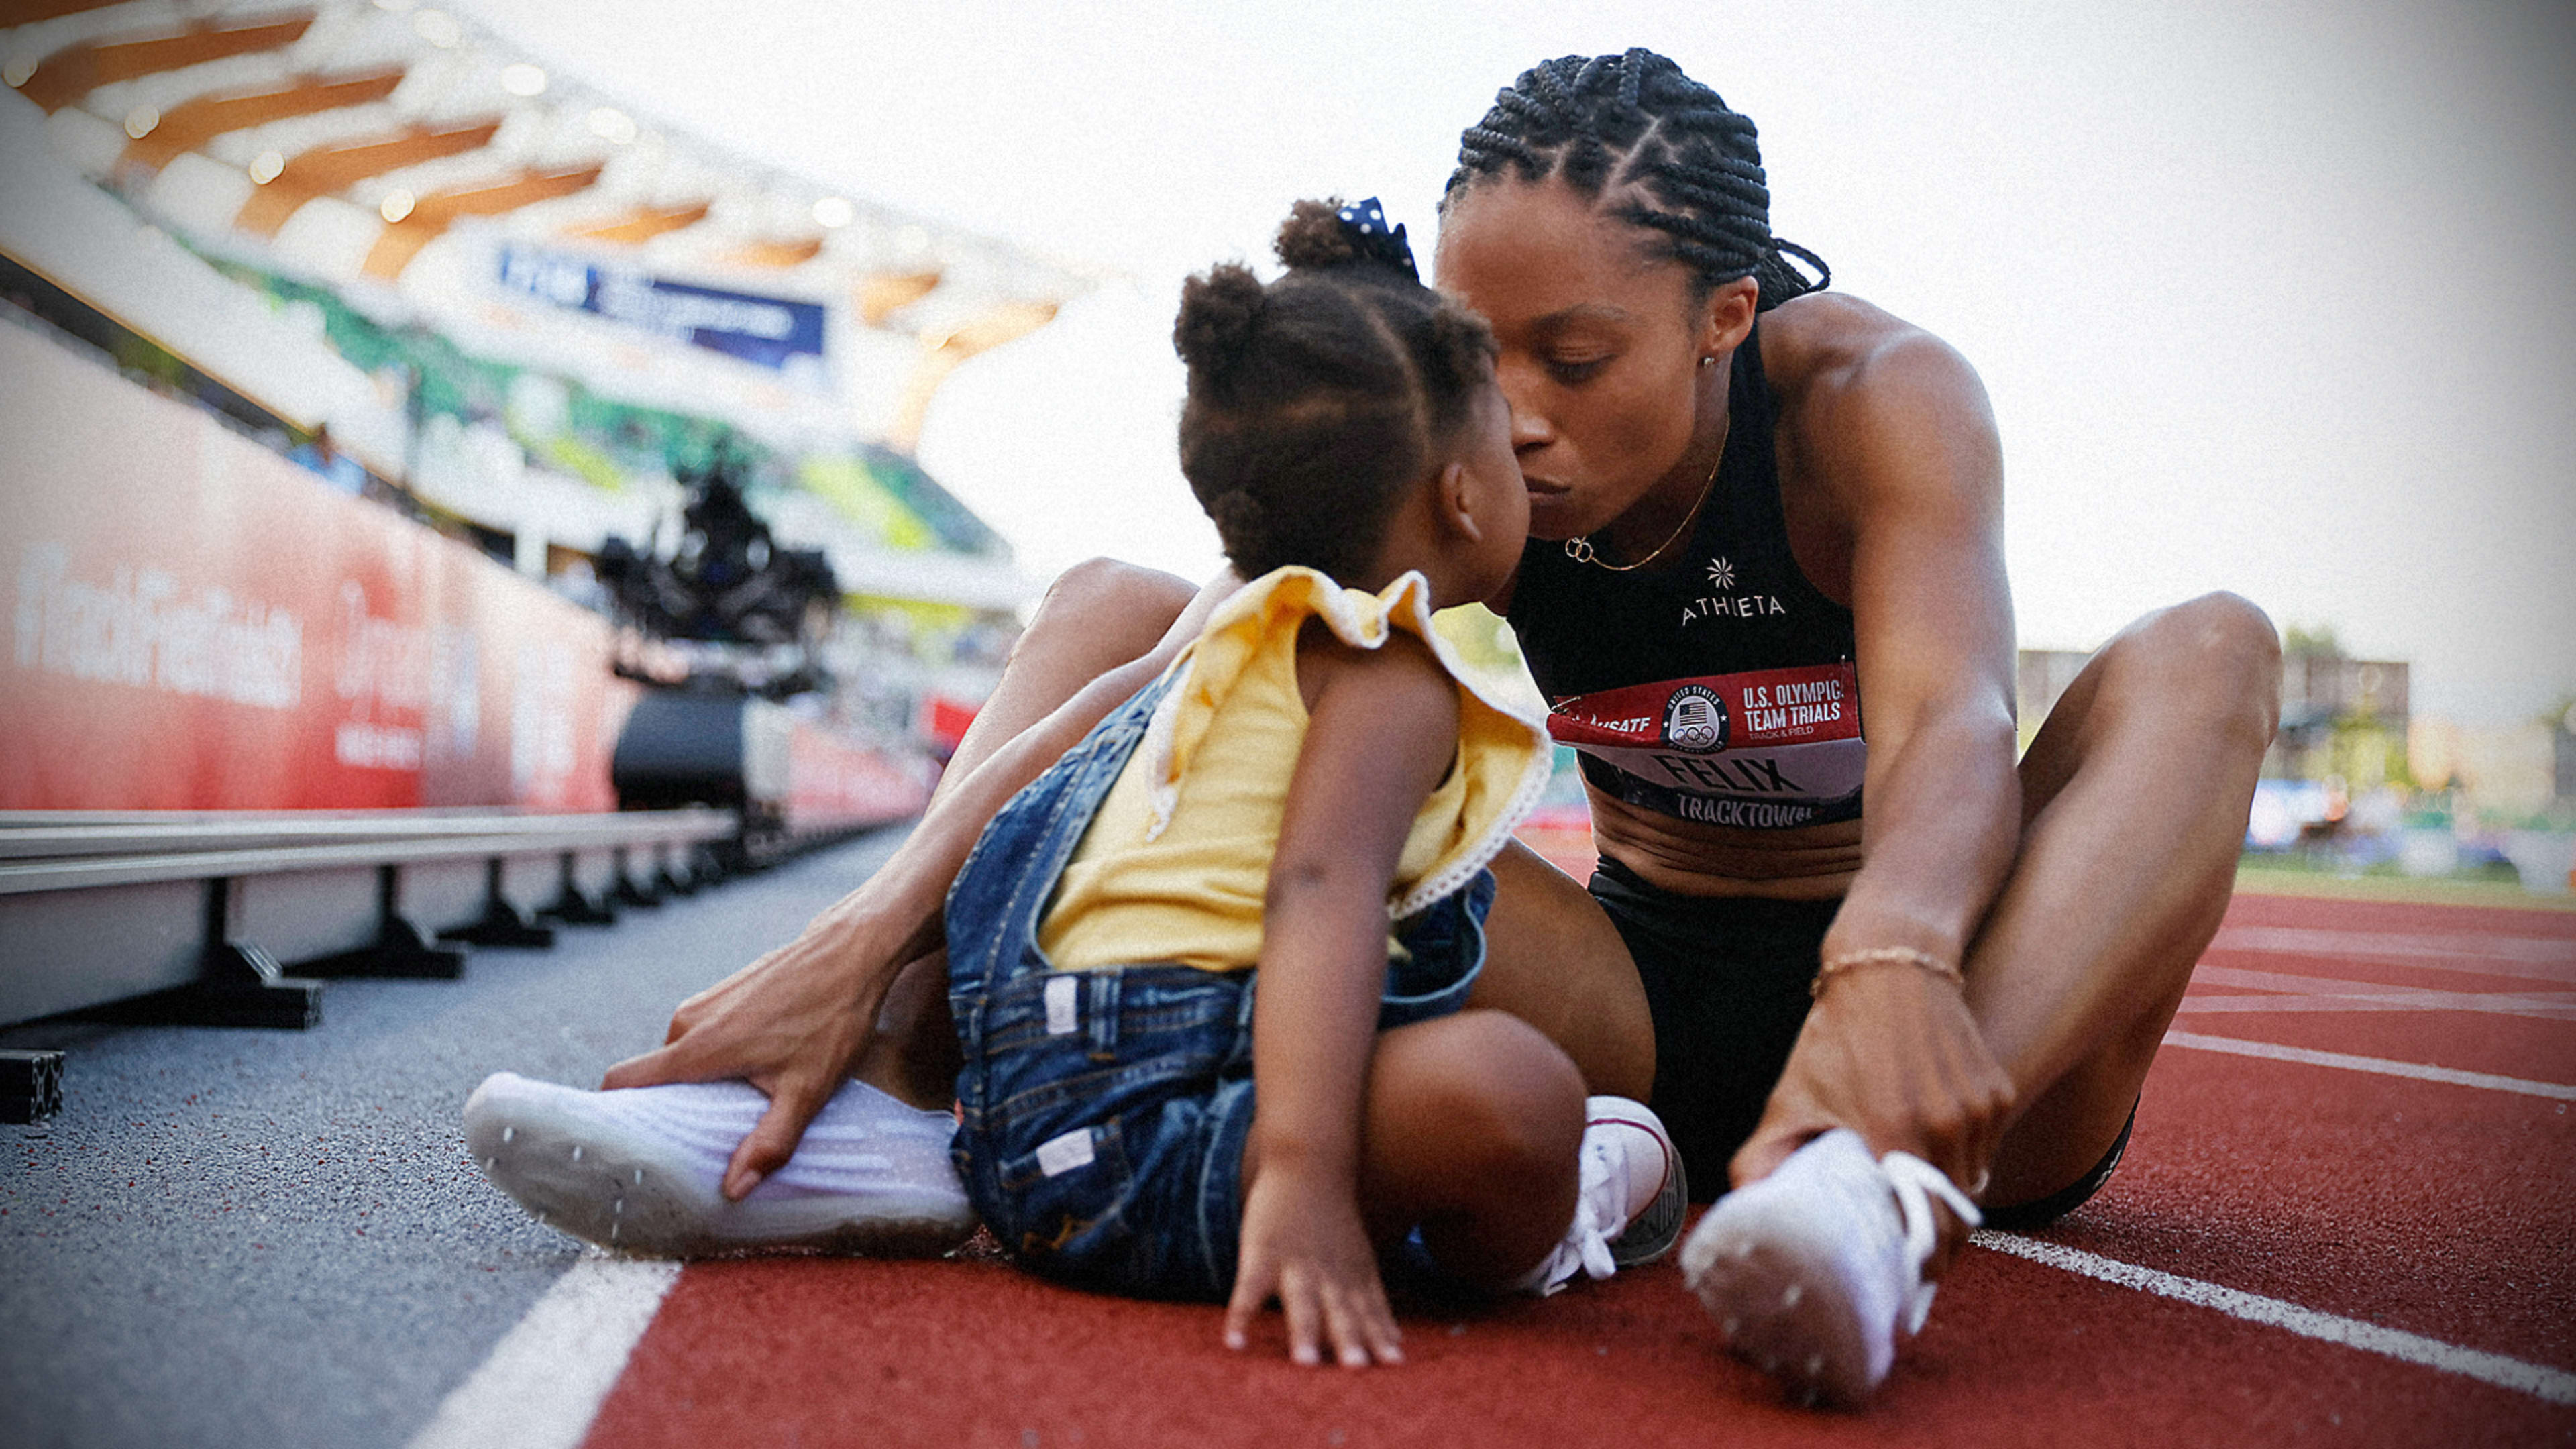 The most decorated Olympian in track and field history is giving fellow athletes $10K each for childcare